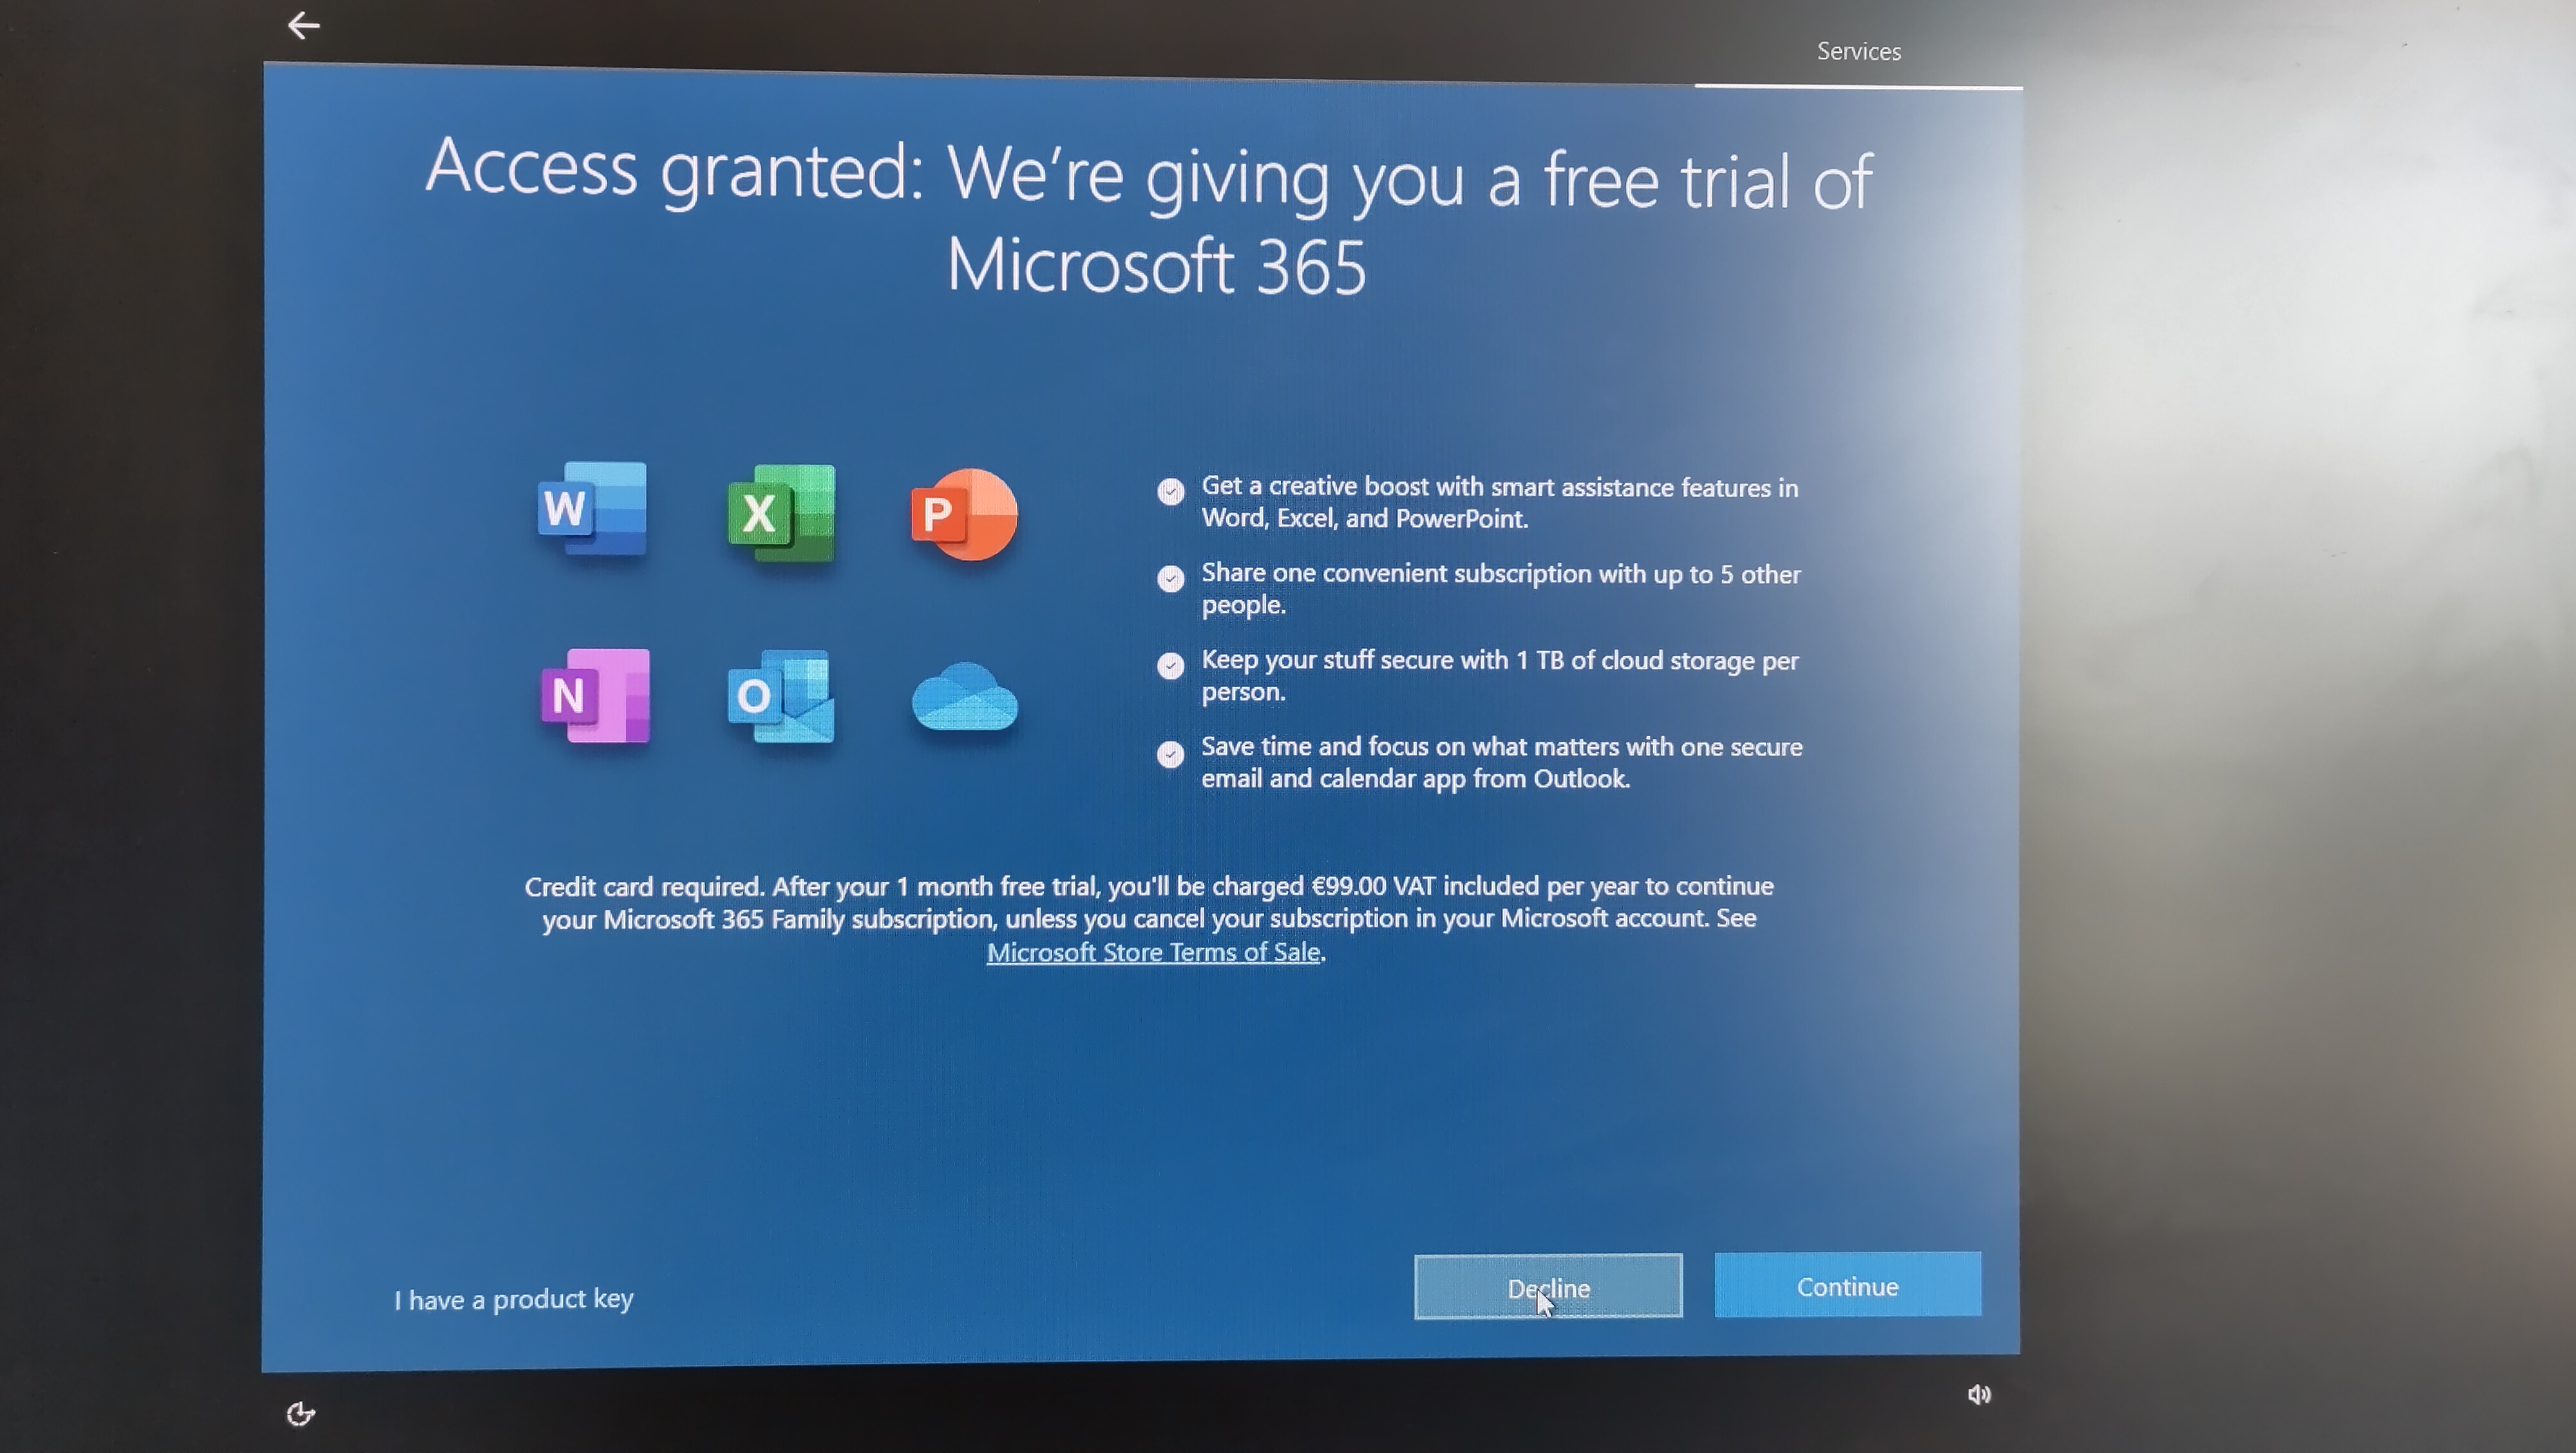 We’re giging you a free trial of Microsoft 365